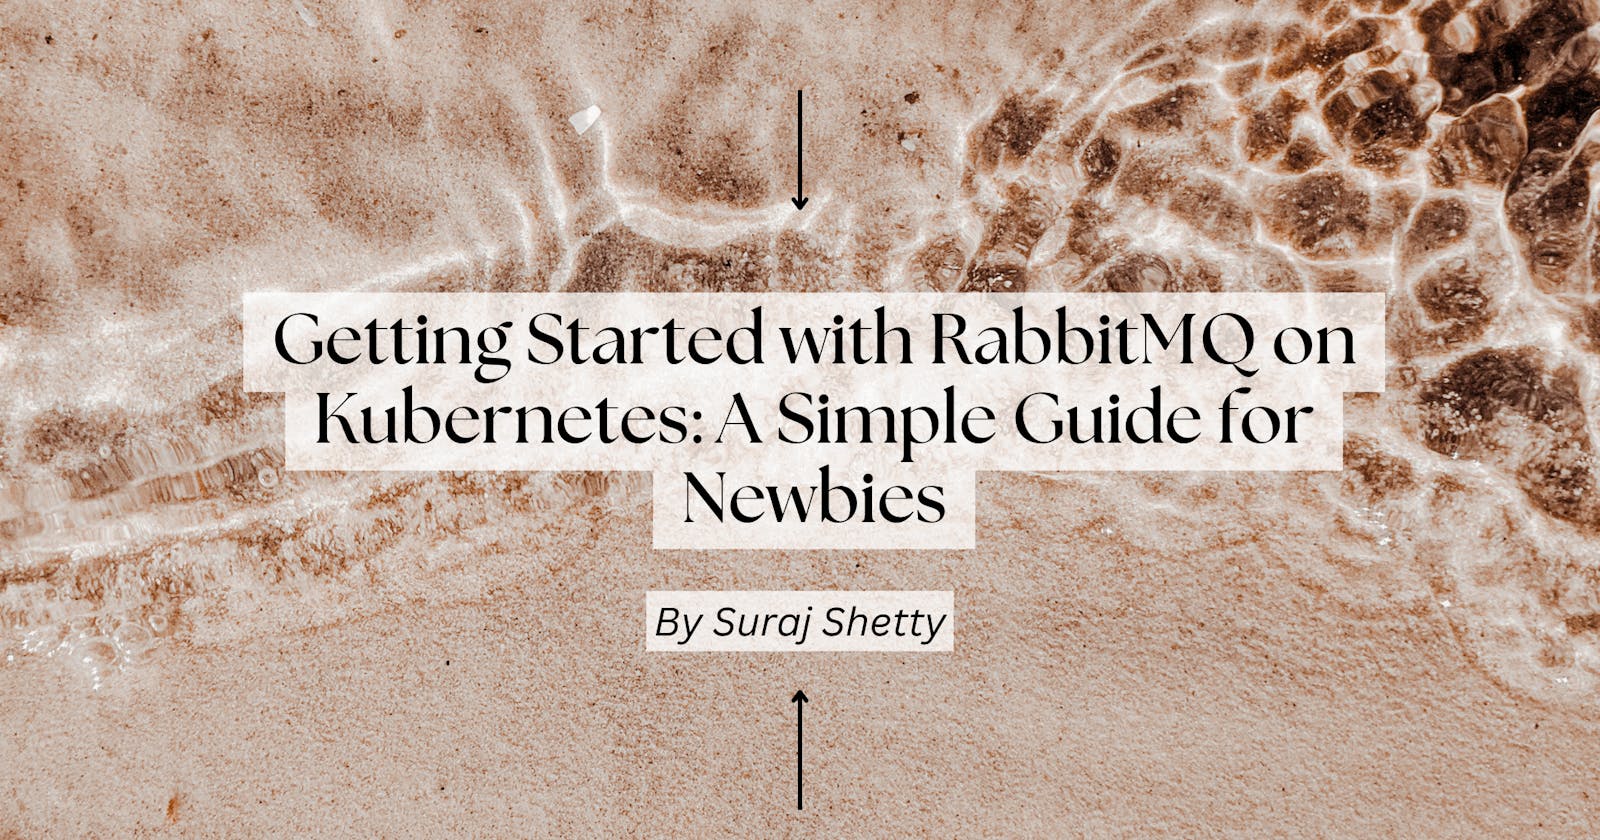 Getting Started with RabbitMQ on Kubernetes: A Simple Guide for Newbies